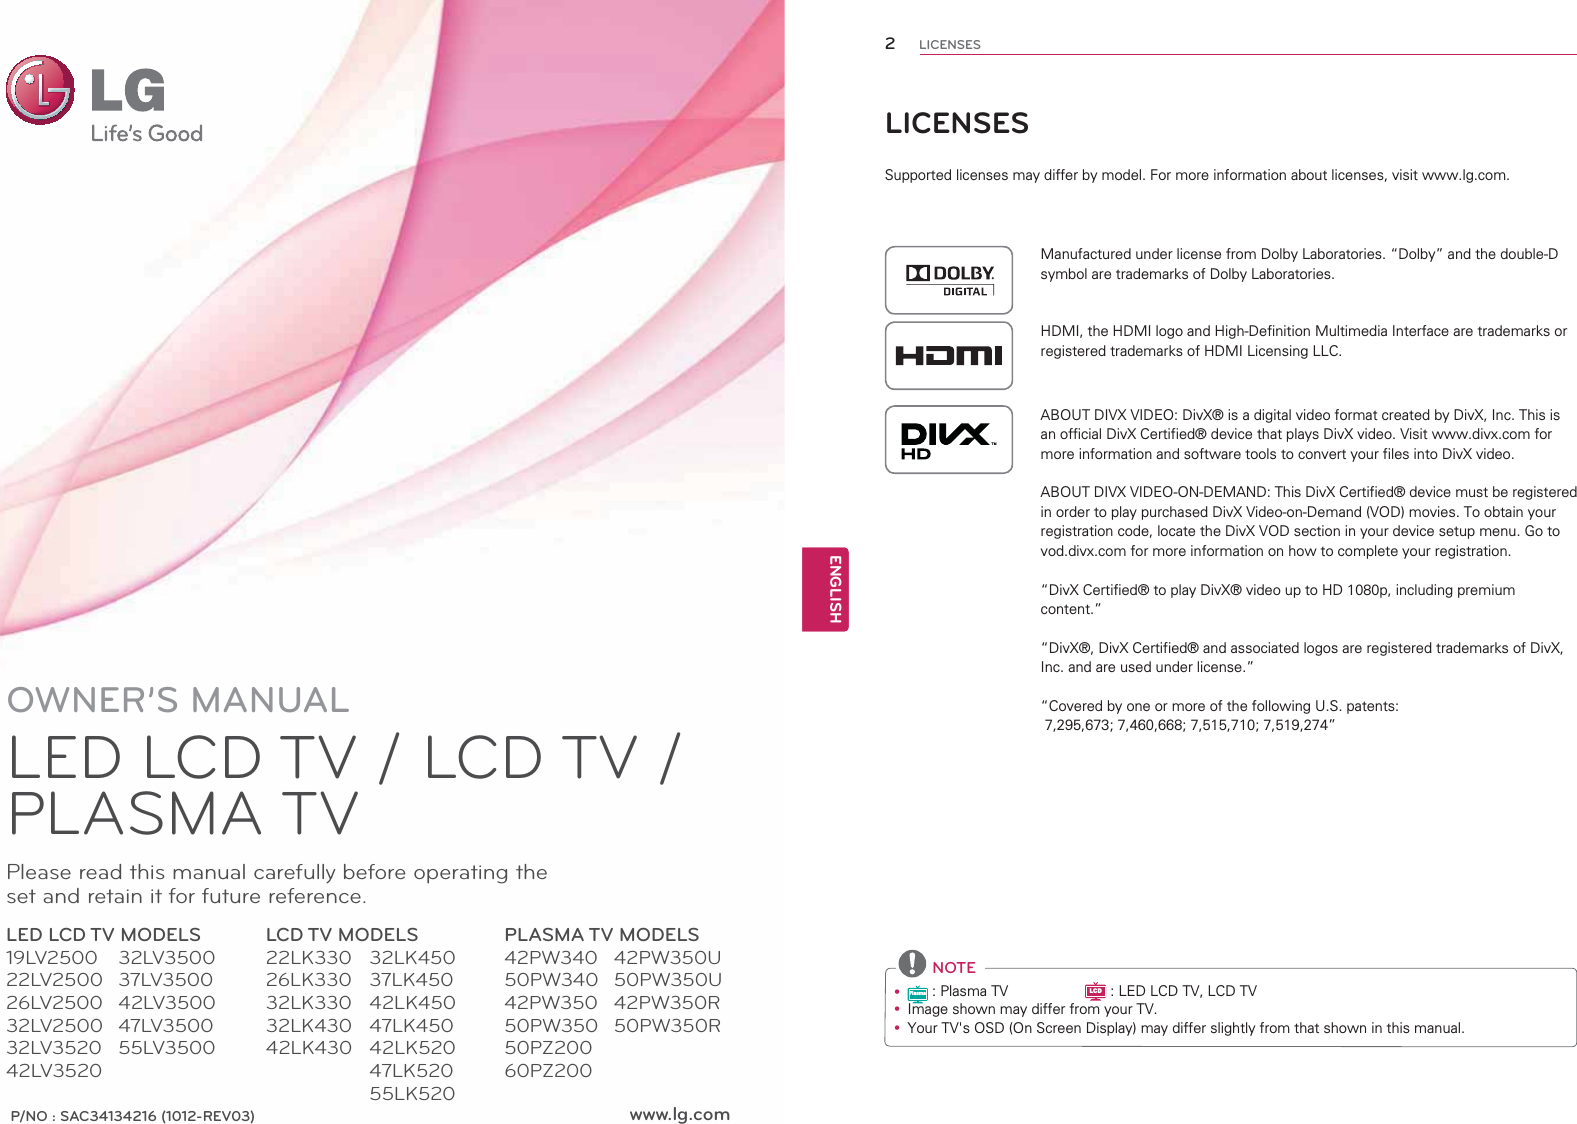 www.lg.comP/NO : SAC34134216 (1012-REV03)OWNER’S MANUALLED LCD TV / LCD TV / PLASMA TVPlease read this manual carefully before operating the set and retain it for future reference.LED LCD TV MODELS19LV250022LV250026LV250032LV250032LV352042LV3520LCD TV MODELS22LK33026LK33032LK33032LK43042LK430PLASMA TV MODELS42PW34050PW34042PW35050PW35050PZ20060PZ20032LV350037LV350042LV350047LV350055LV350032LK45037LK45042LK45047LK45042LK52047LK52055LK52042PW350U50PW350U42PW350R50PW350R2ENGENGLISHLICENSESLICENSESSupported licenses may differ by model. For more information about licenses, visit www.lg.com.Manufactured under license from Dolby Laboratories. “Dolby” and the double-D symbol are trademarks of Dolby Laboratories.HDMI, the HDMI logo and High-Definition Multimedia Interface are trademarks or registered trademarks of HDMI Licensing LLC.ABOUT DIVX VIDEO: DivX® is a digital video format created by DivX, Inc. This is an official DivX Certified® device that plays DivX video. Visit www.divx.com for more information and software tools to convert your files into DivX video.ABOUT DIVX VIDEO-ON-DEMAND: This DivX Certified® device must be registered in order to play purchased DivX Video-on-Demand (VOD) movies. To obtain your registration code, locate the DivX VOD section in your device setup menu. Go to vod.divx.com for more information on how to complete your registration. “DivX Certified® to play DivX® video up to HD 1080p, including premium content.”“DivX®, DivX Certified® and associated logos are registered trademarks of DivX, Inc. and are used under license.”“Covered by one or more of the following U.S. patents:   7,295,673; 7,460,668; 7,515,710; 7,519,274” NOTEyPlasma : Plasma TV                   LCD : LED LCD TV, LCD TVy Image shown may differ from your TV.y Your TV&apos;s OSD (On Screen Display) may differ slightly from that shown in this manual.